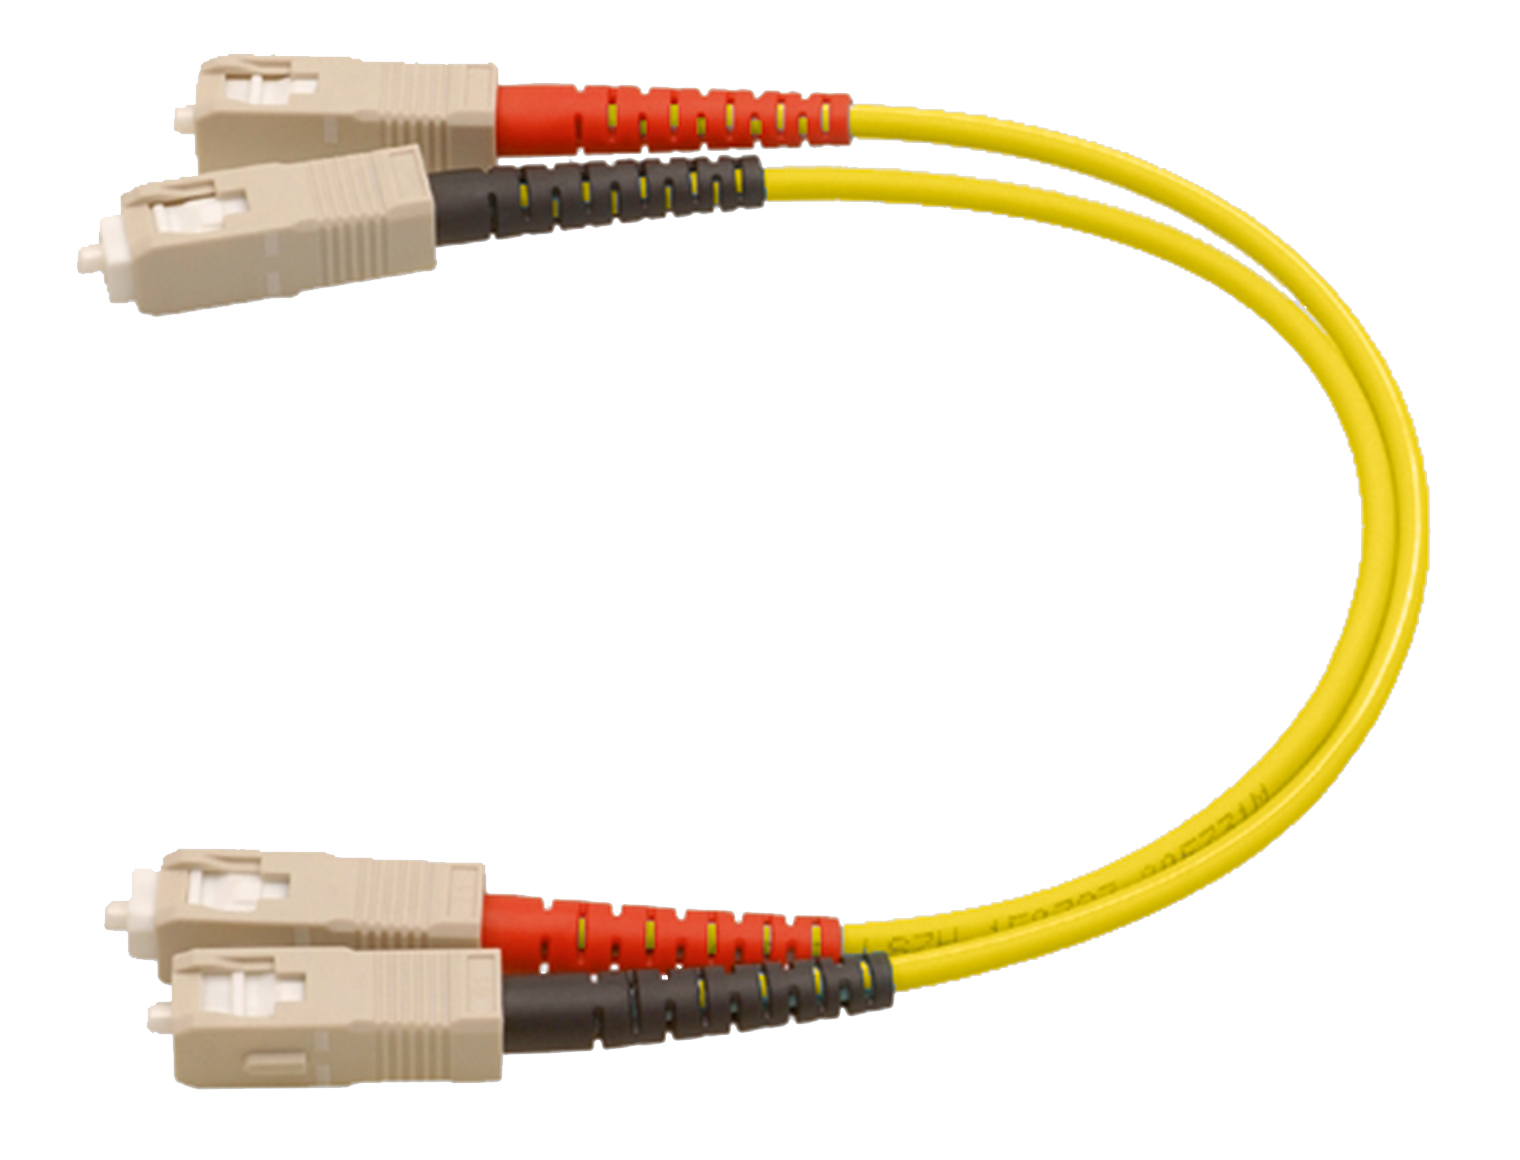 HELUCOM® CONNECTING SYSTEMS® Jumper cable I-VH 2x1 SC/SC